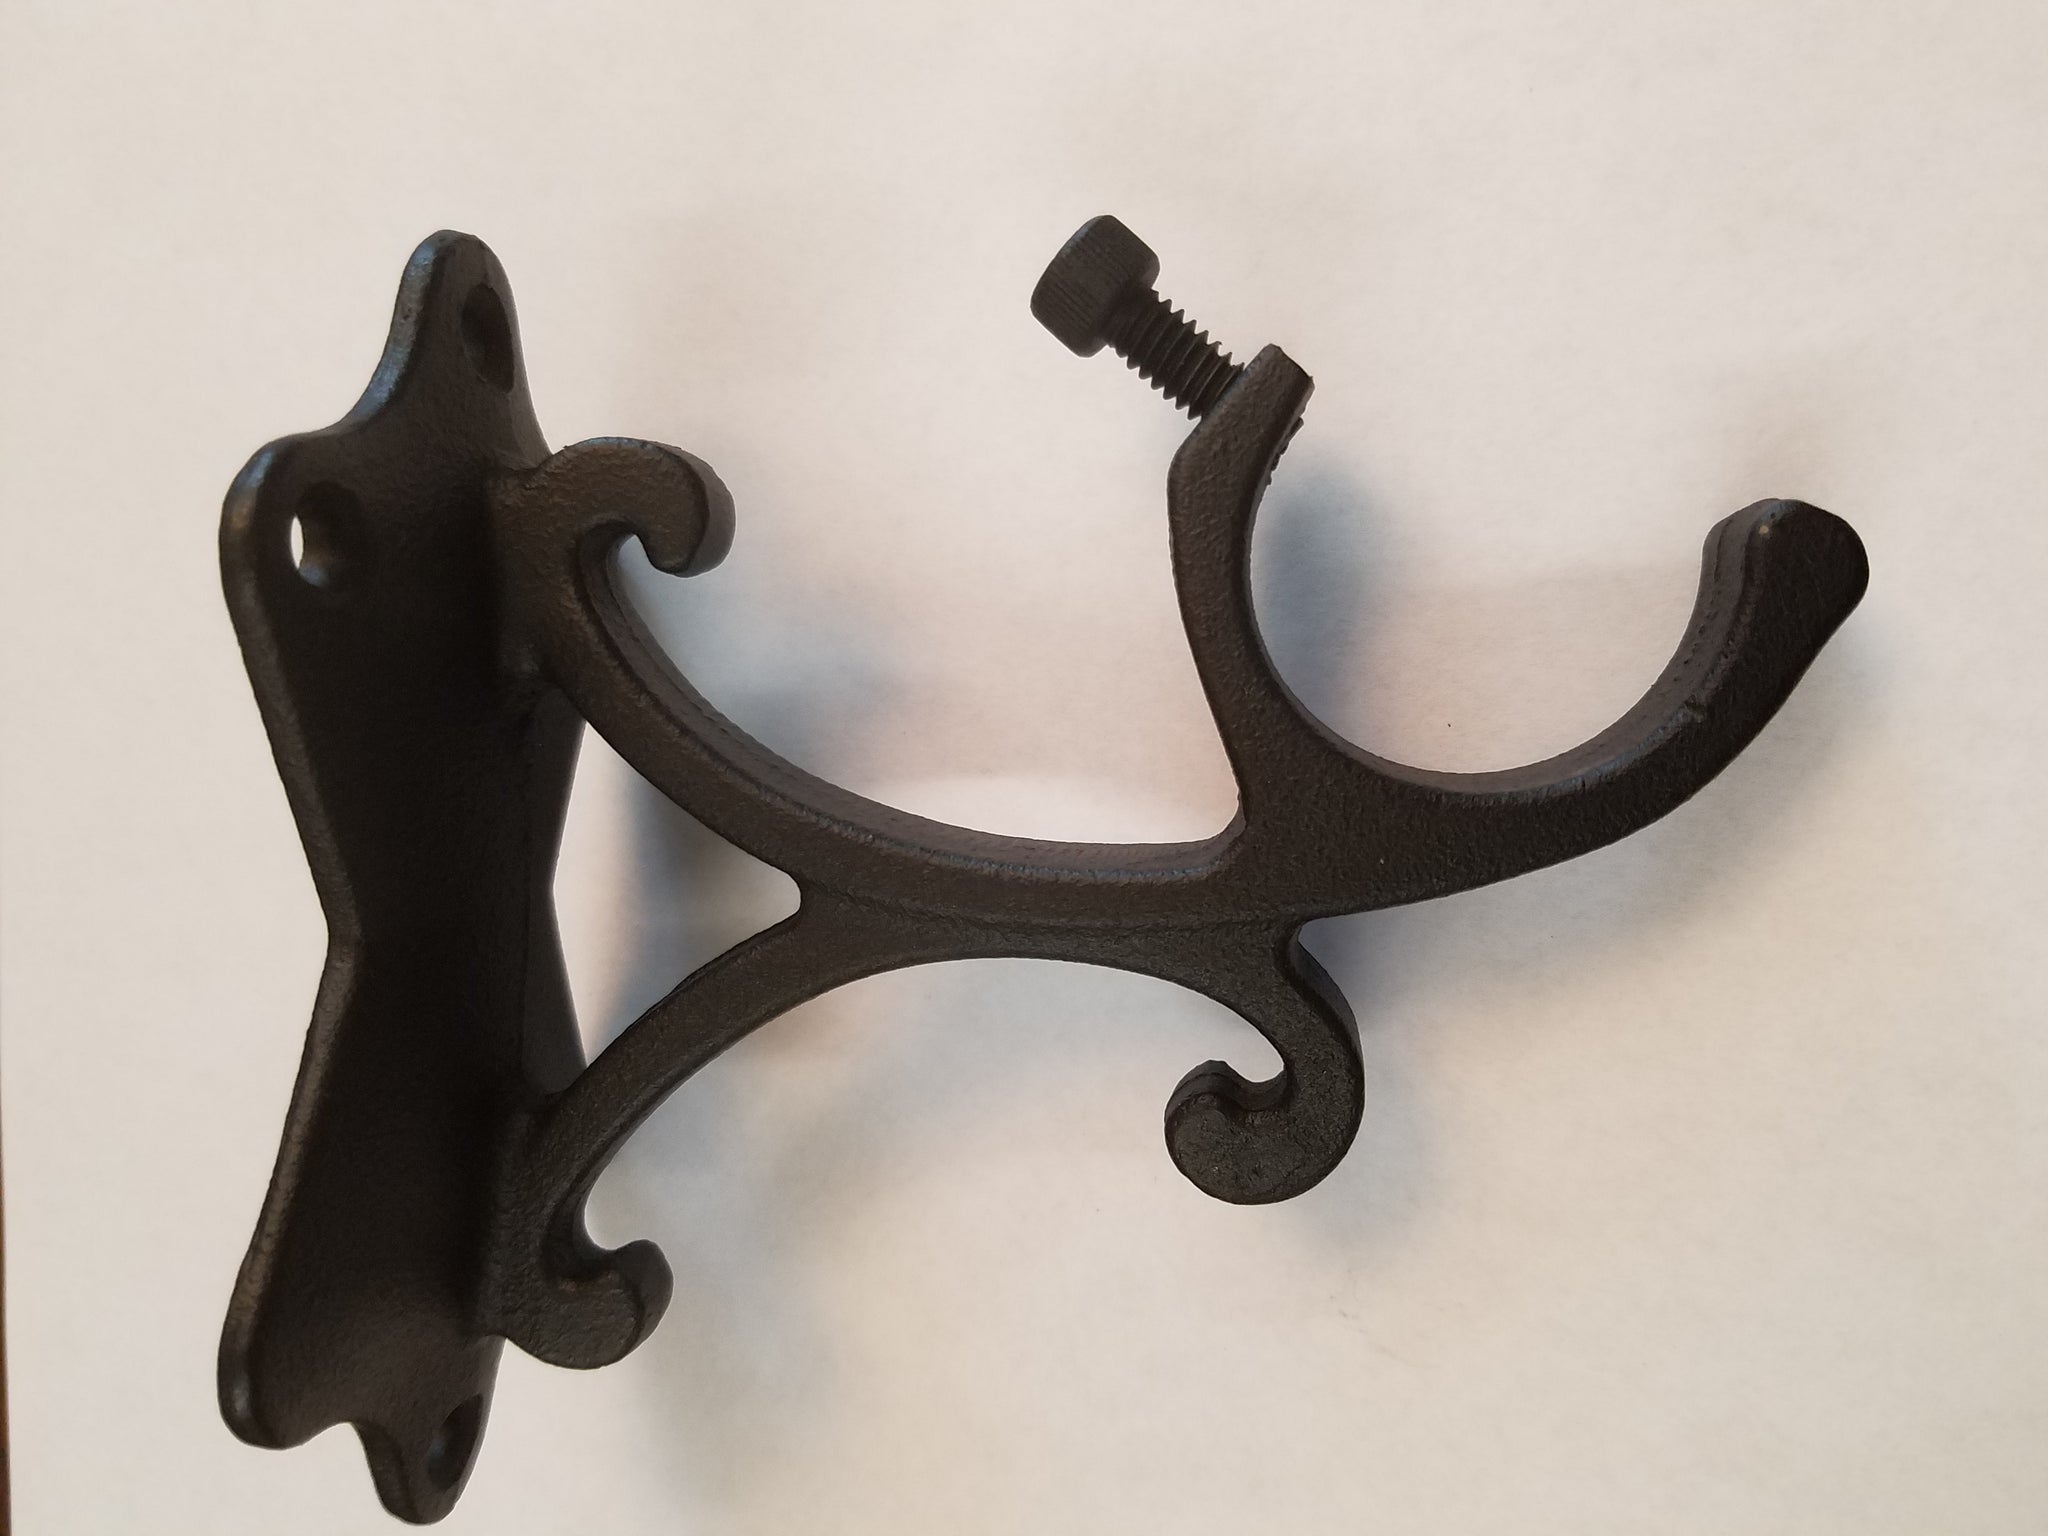 Decorative bracket for 1" and 1-1/4" iron rod, each.